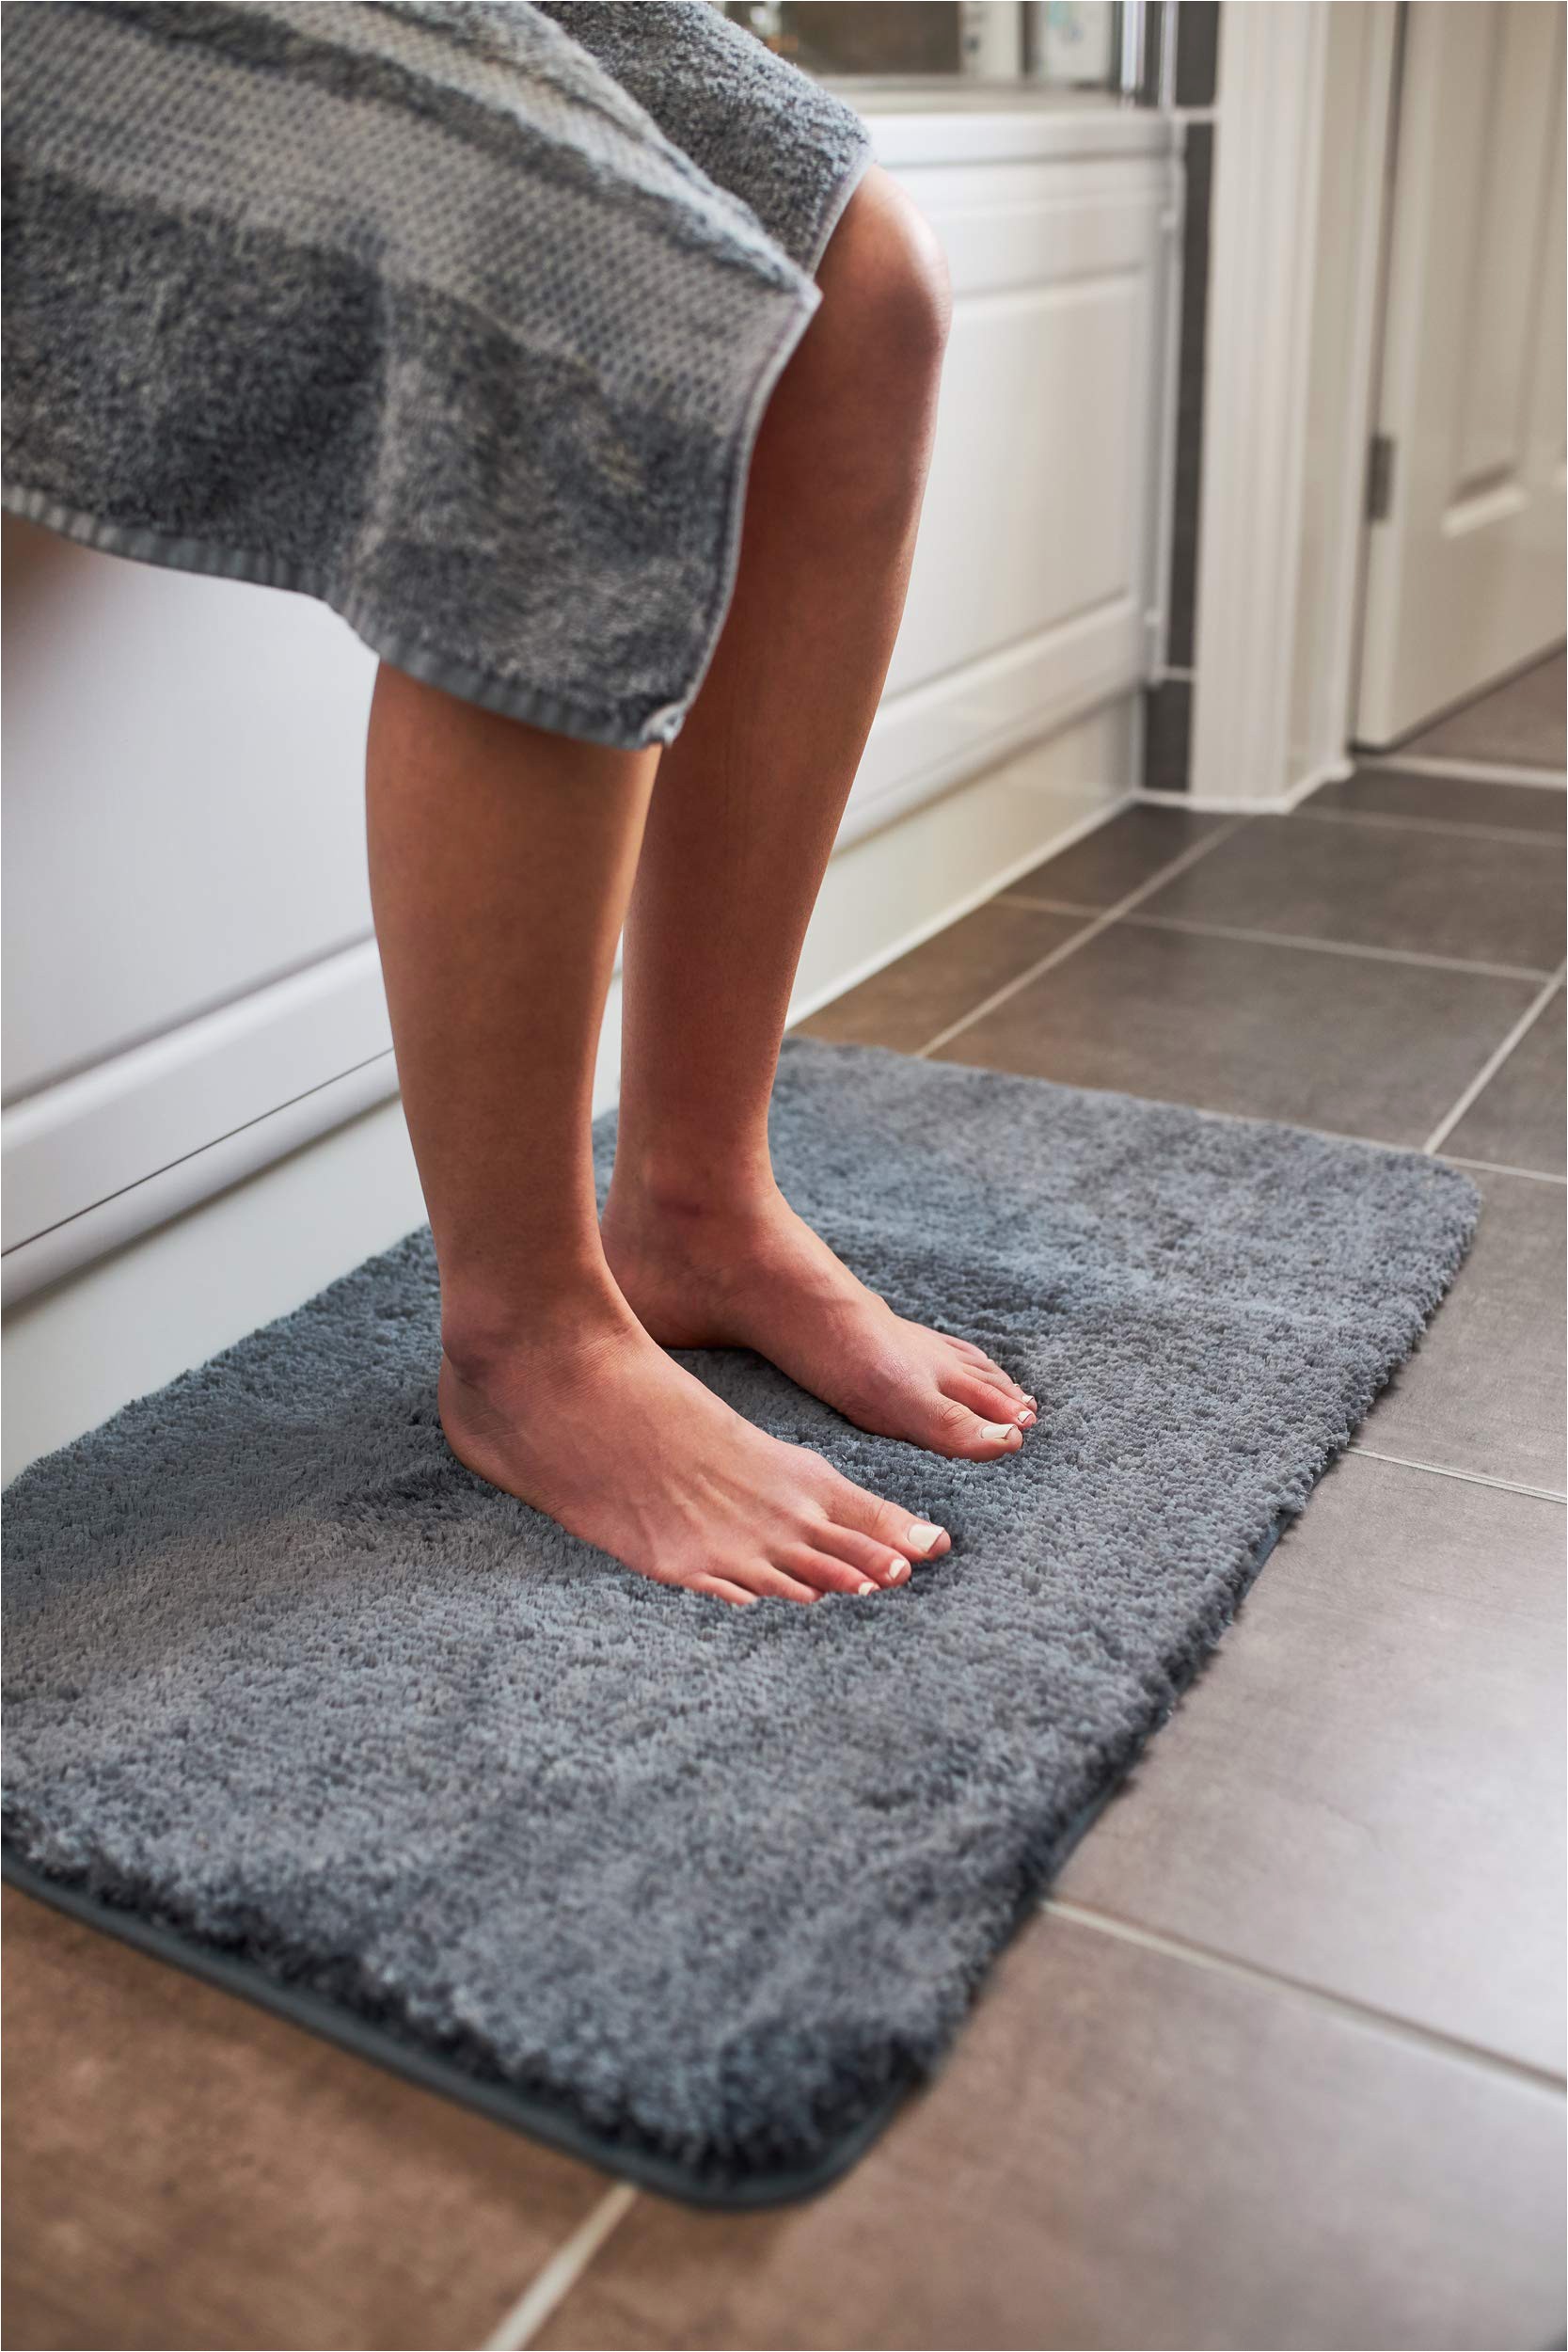 Best Non Skid Bath Rugs Luxury Grey Bath Mat Microfiber Non Slip Bath Rug with Super soft Absorbent Dry Fast Design for Bath and Shower